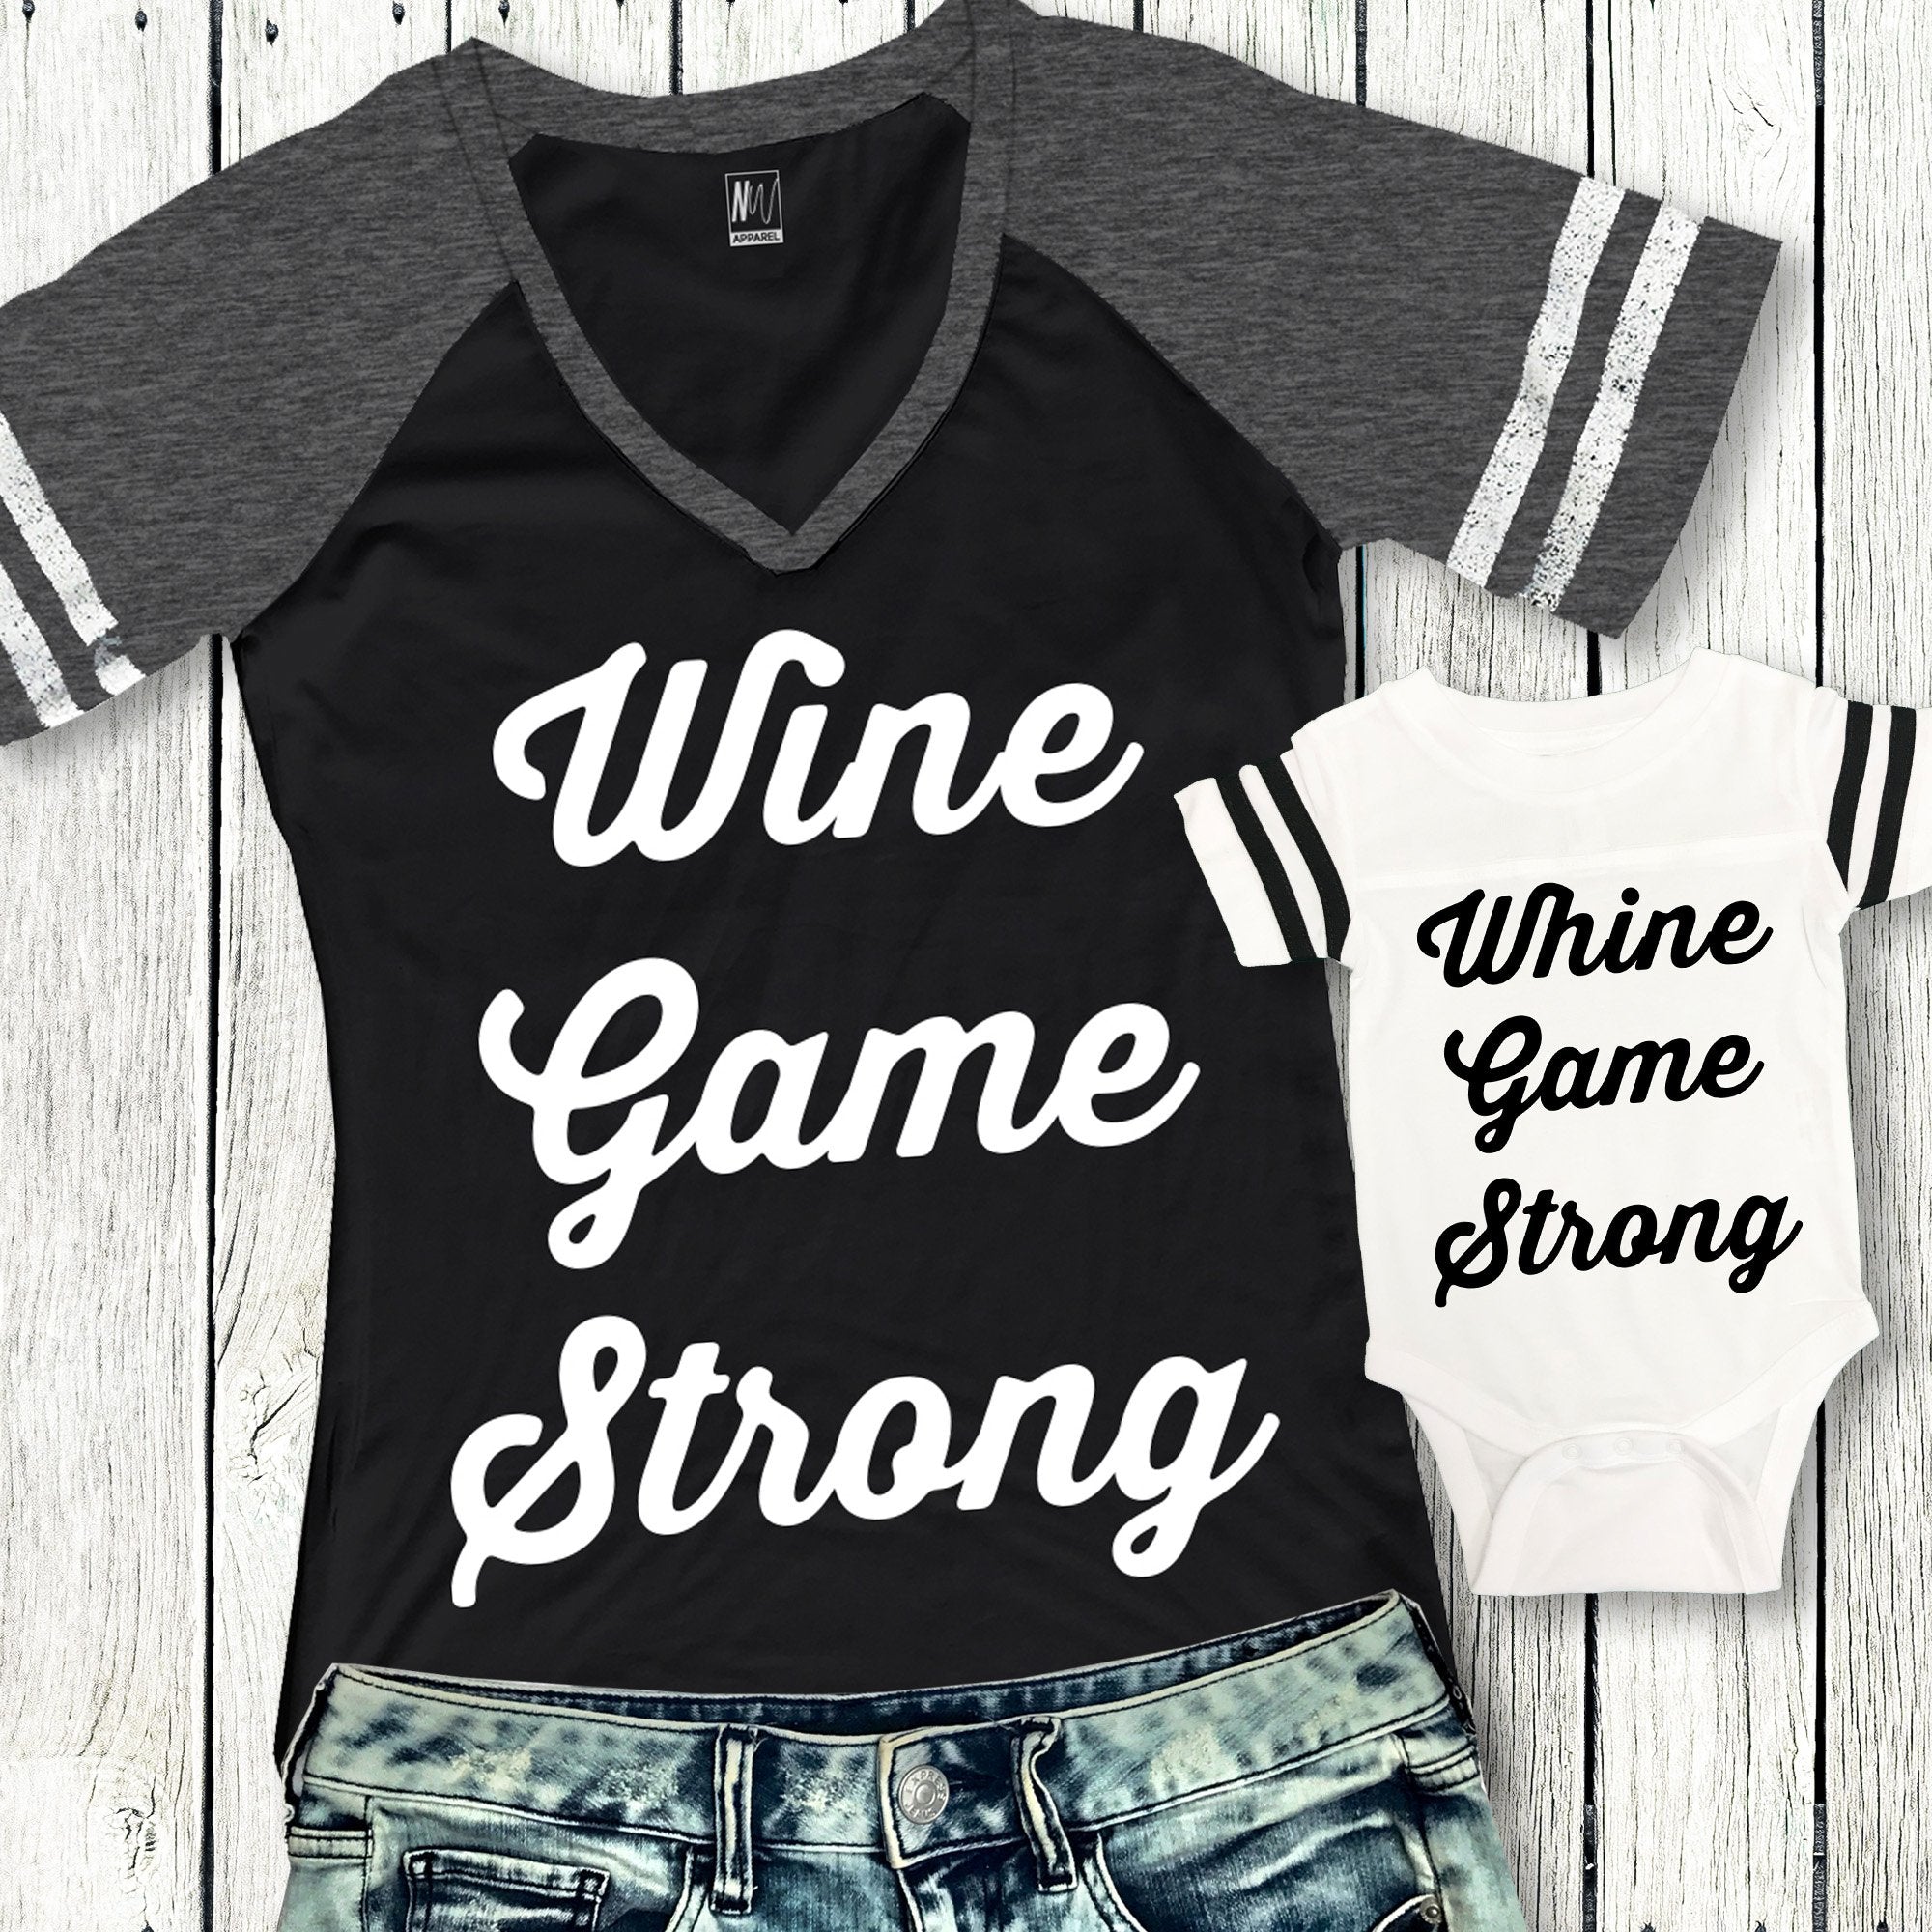 Mommy & Me Whine Game Shirts Set